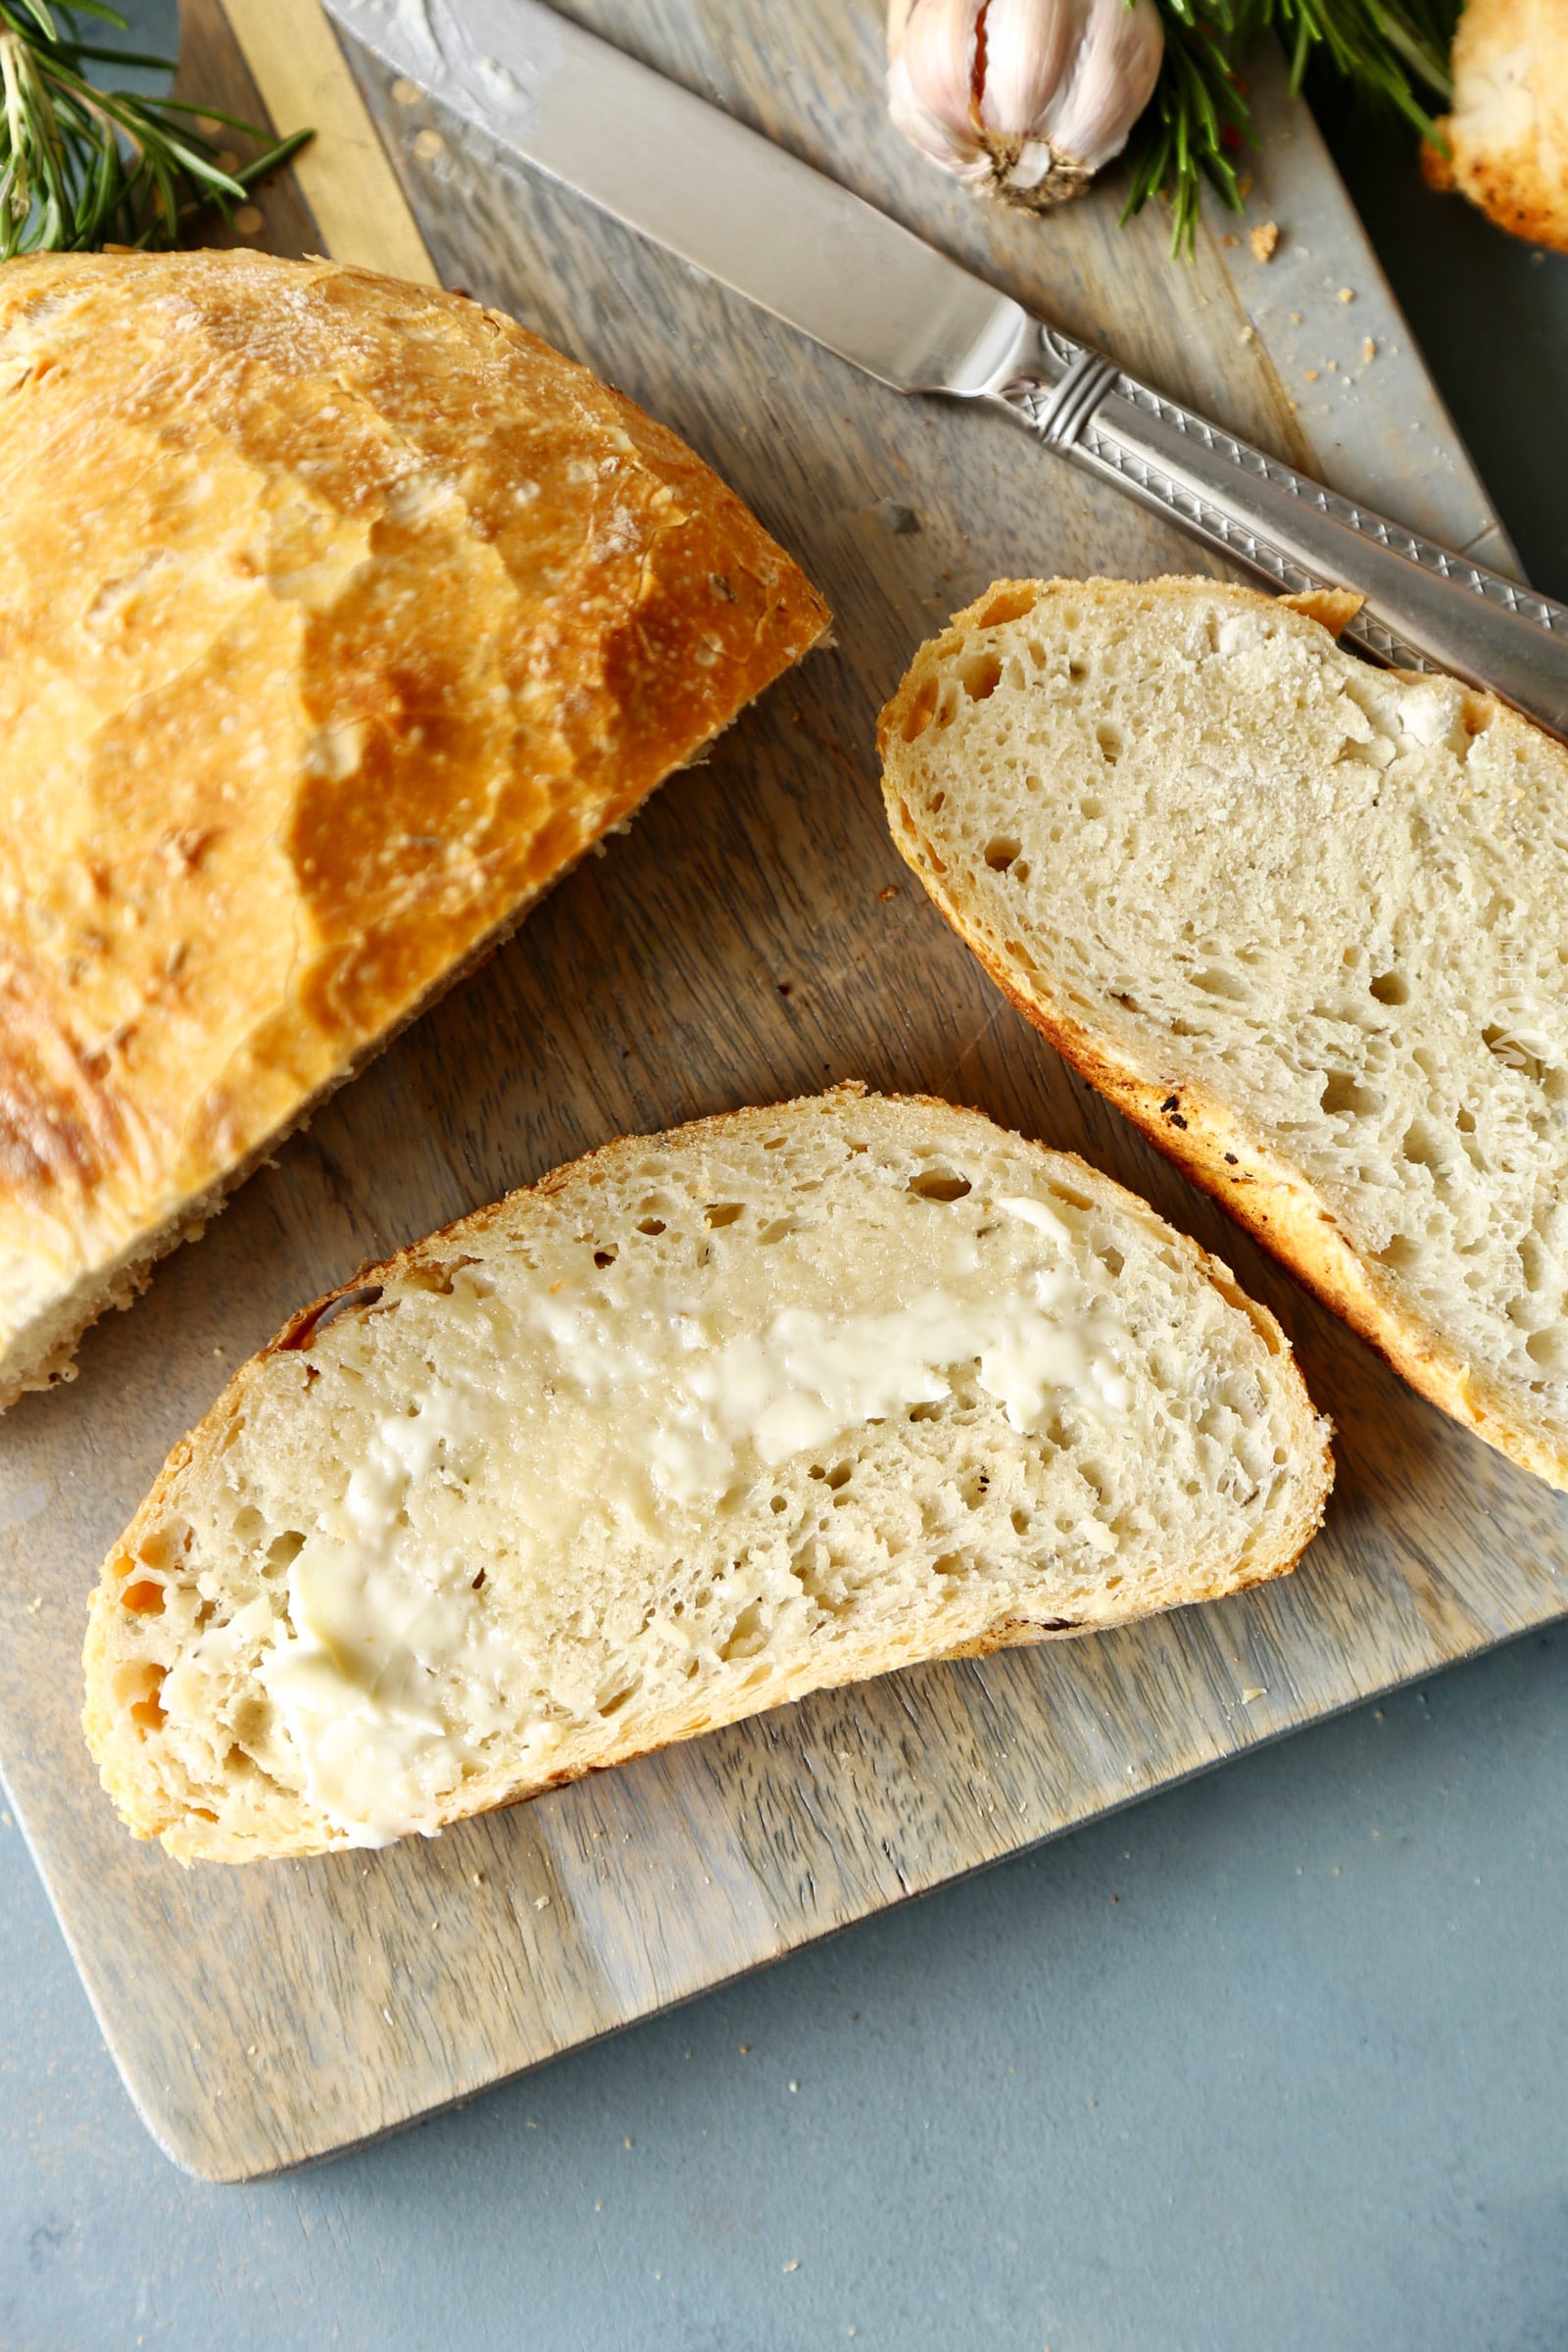 Homemade Artisan No-Knead Bread | Perfectly crusty on the outside, with a soft fluffy inside, this no knead bread is perfect with any dinner! | https://thechunkychef.com